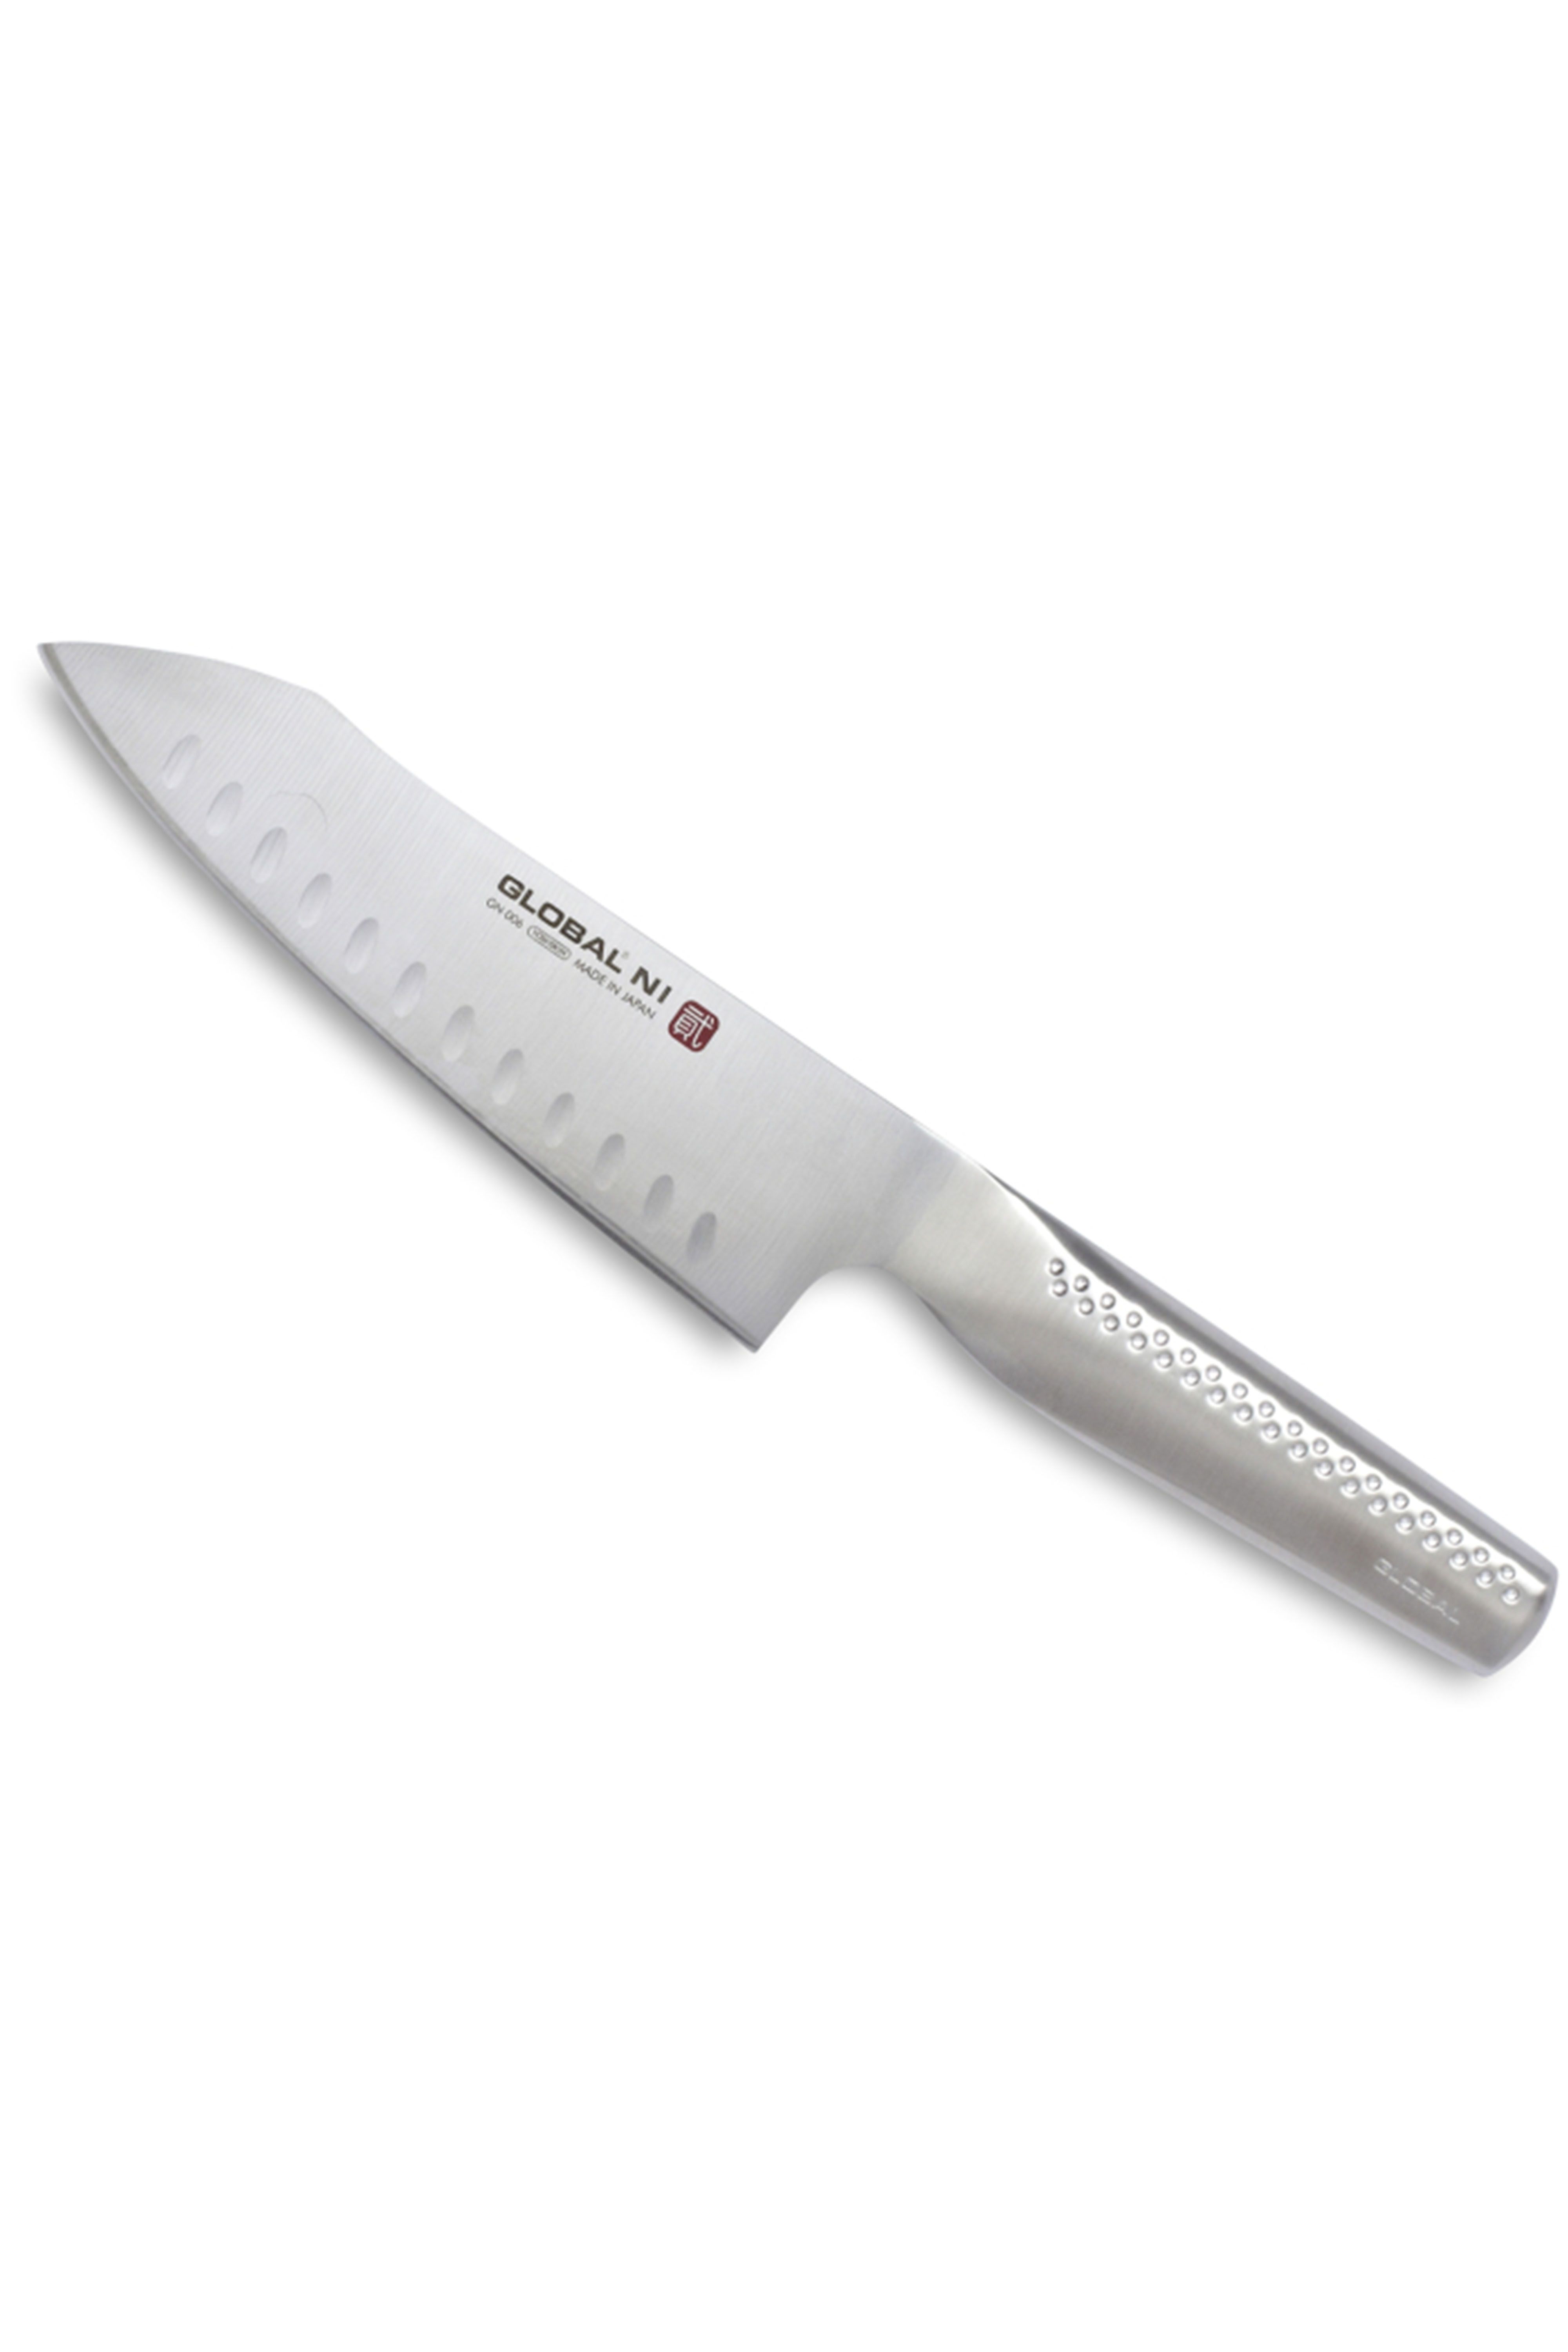 10 Best Kitchen Knives You Need Top Rated Cutlery And Chef Knife